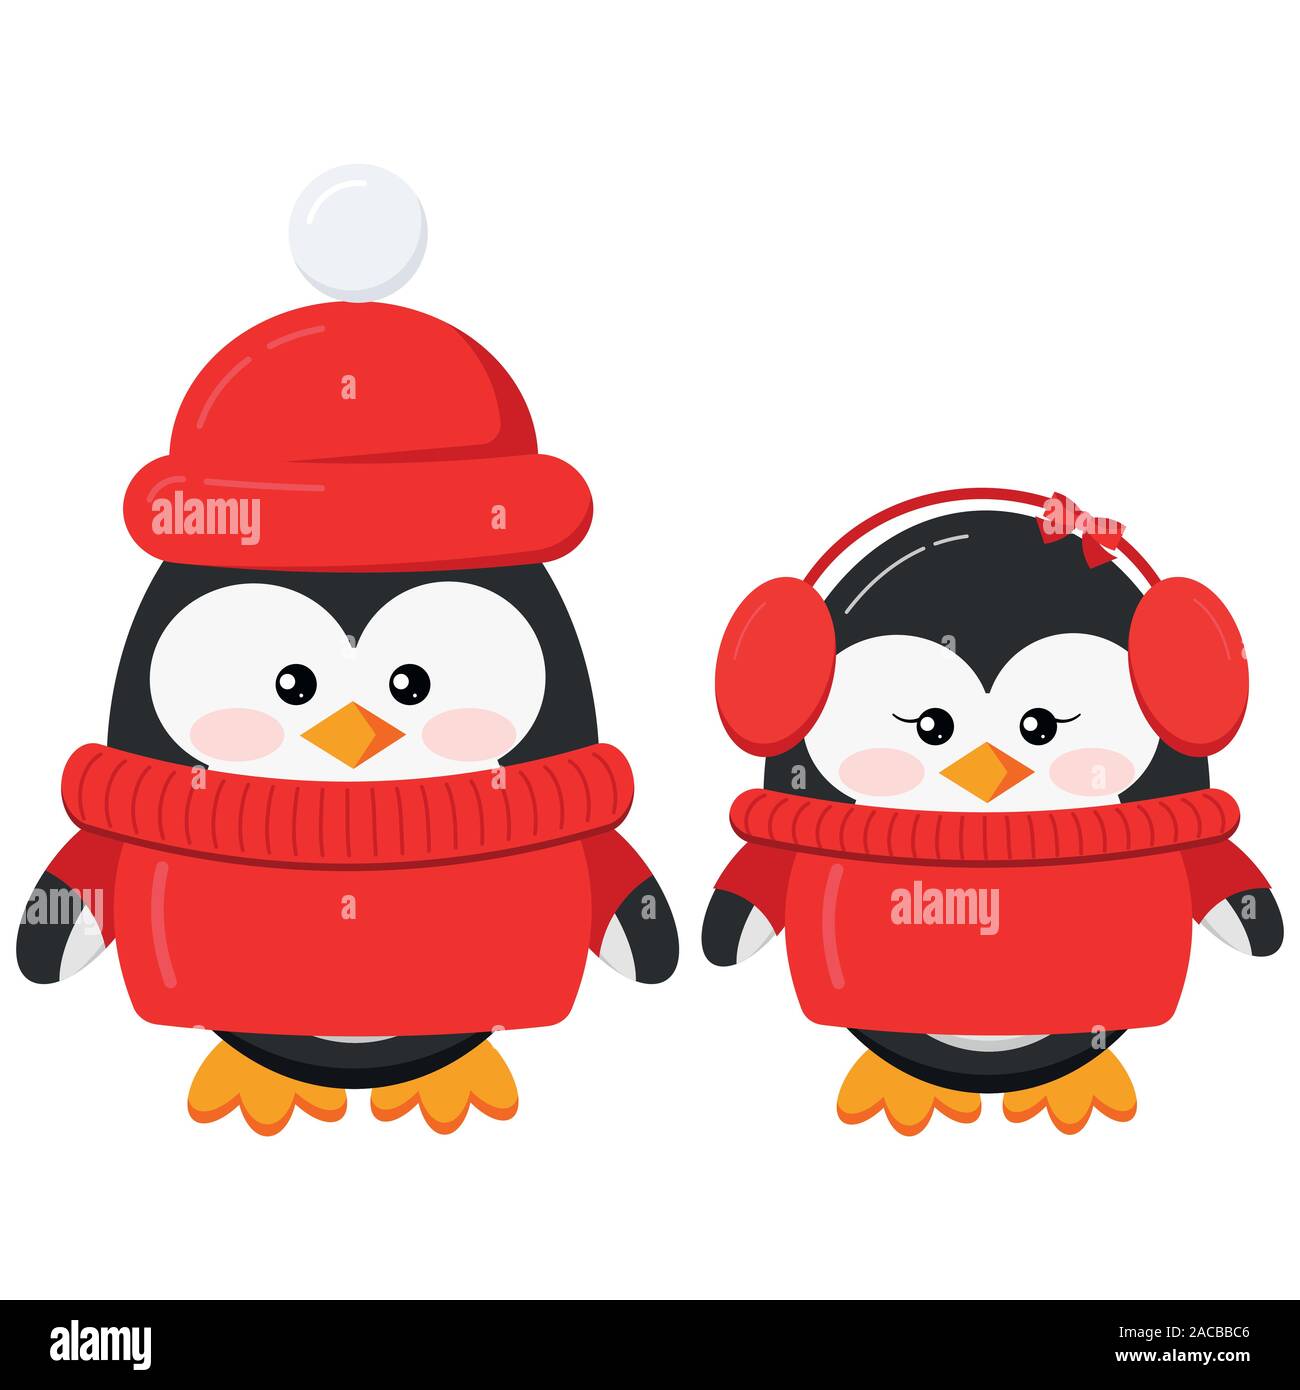 Winter Illustration With Funny Cartoon Penguin In A Warm Knitted